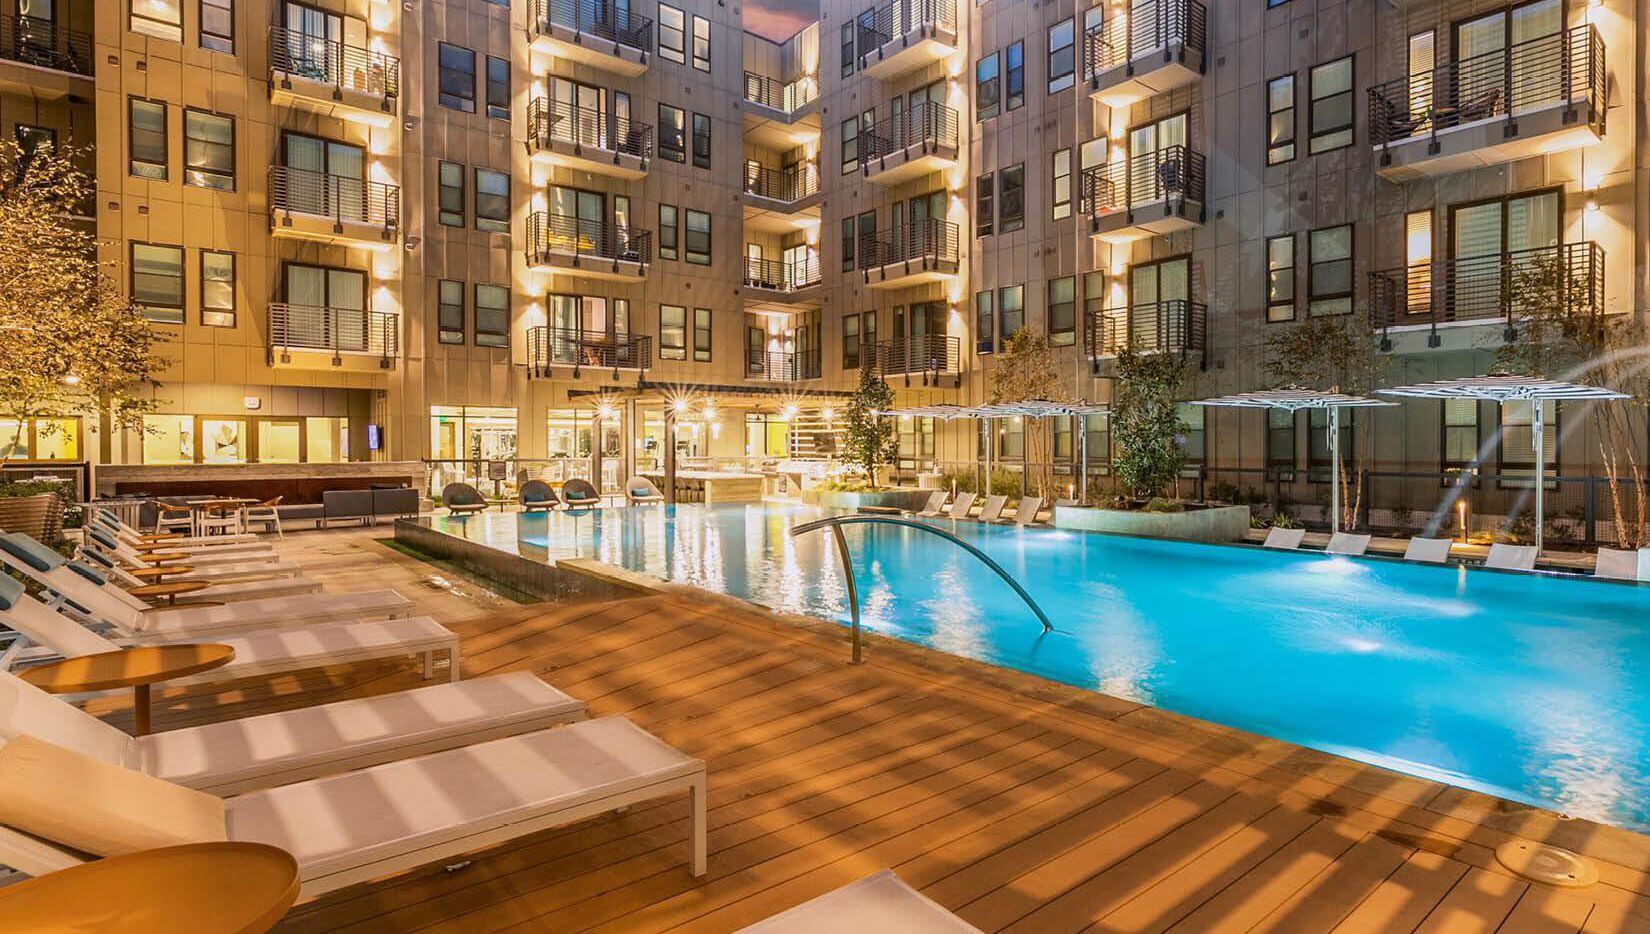 The Cooper, a 390-unit apartment complex in Fort Worth, sold to an affiliate of Lightbulb...